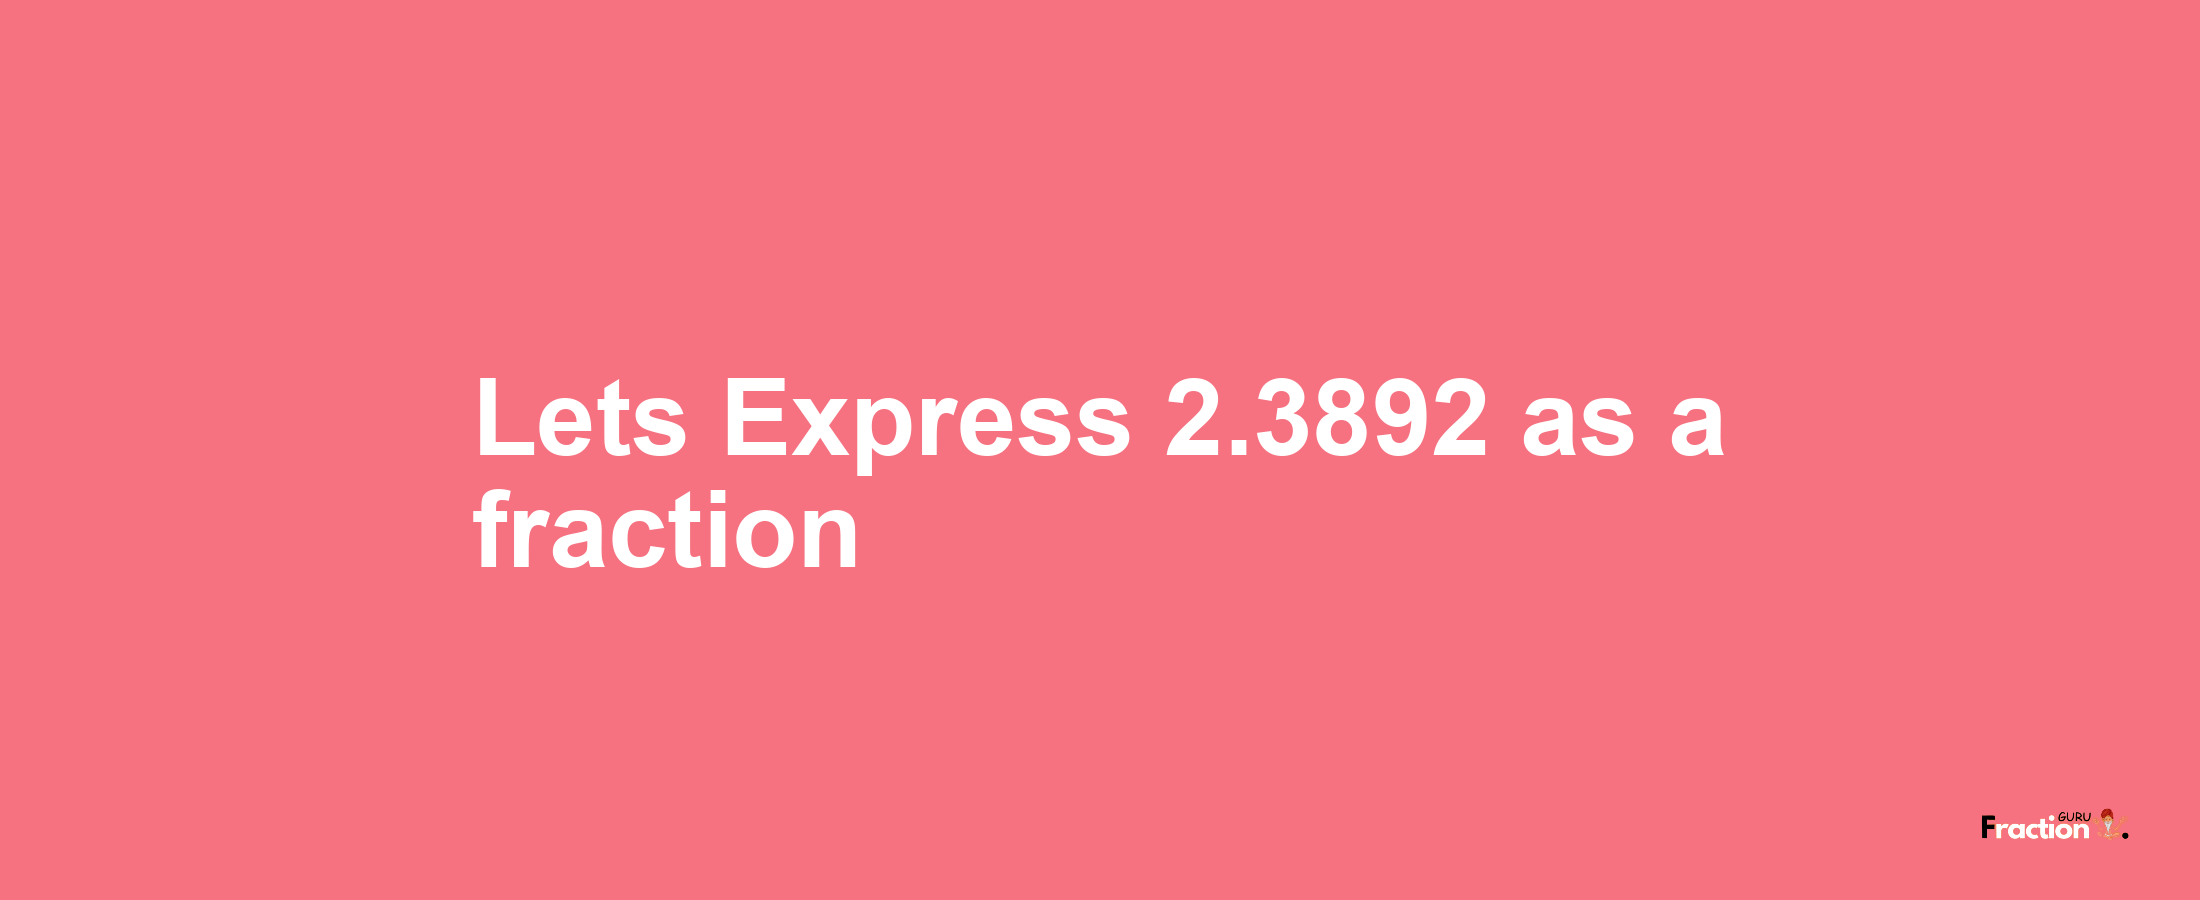 Lets Express 2.3892 as afraction